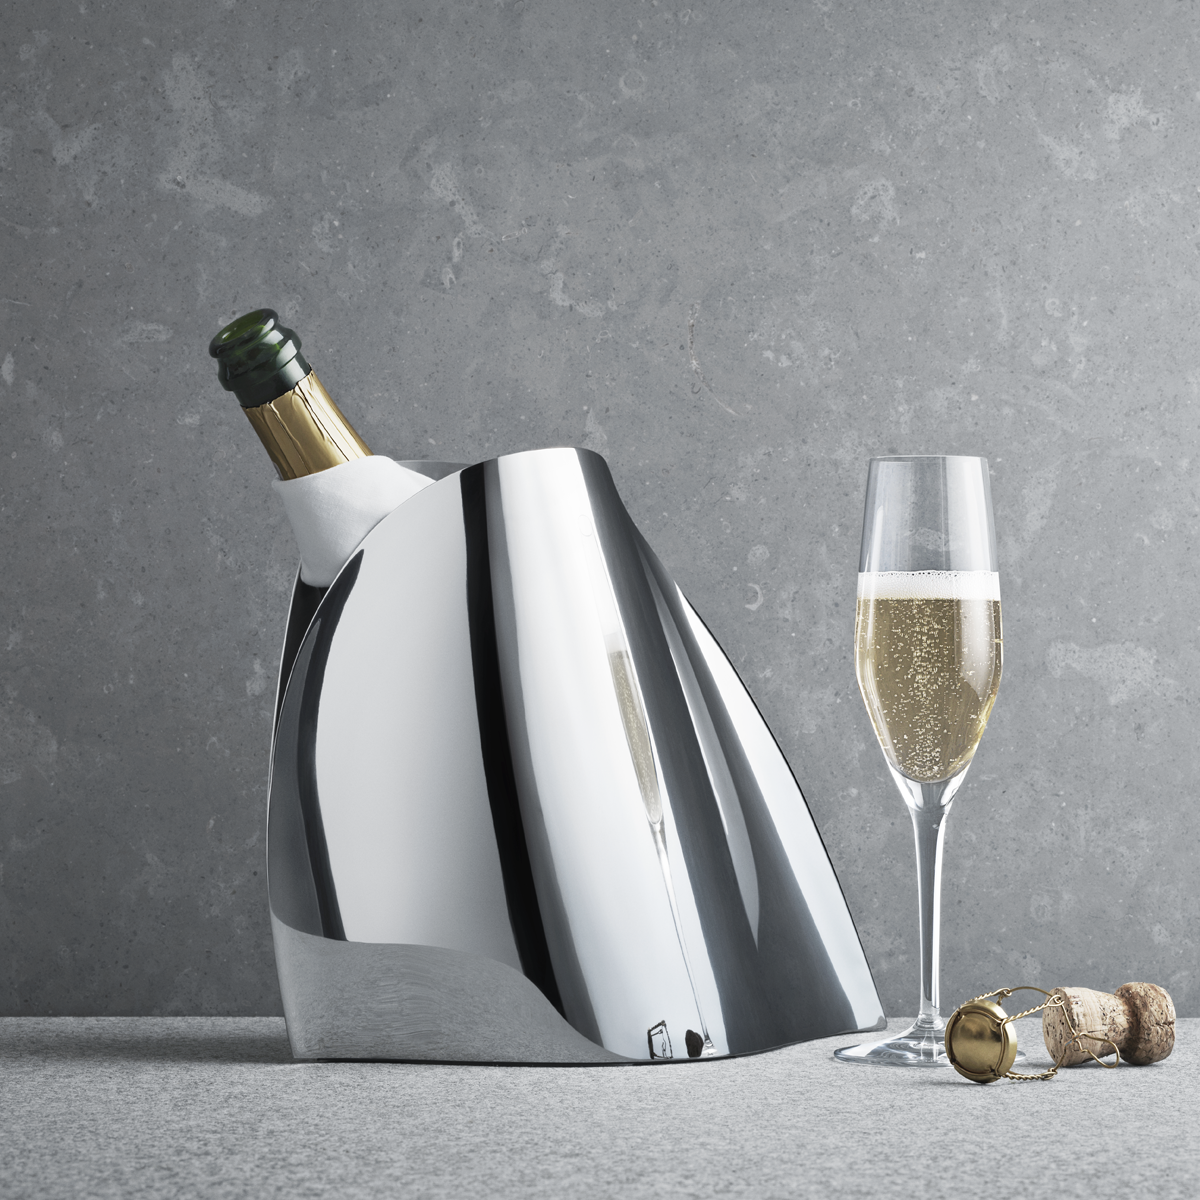 INDULGENCE champagne cooler in 